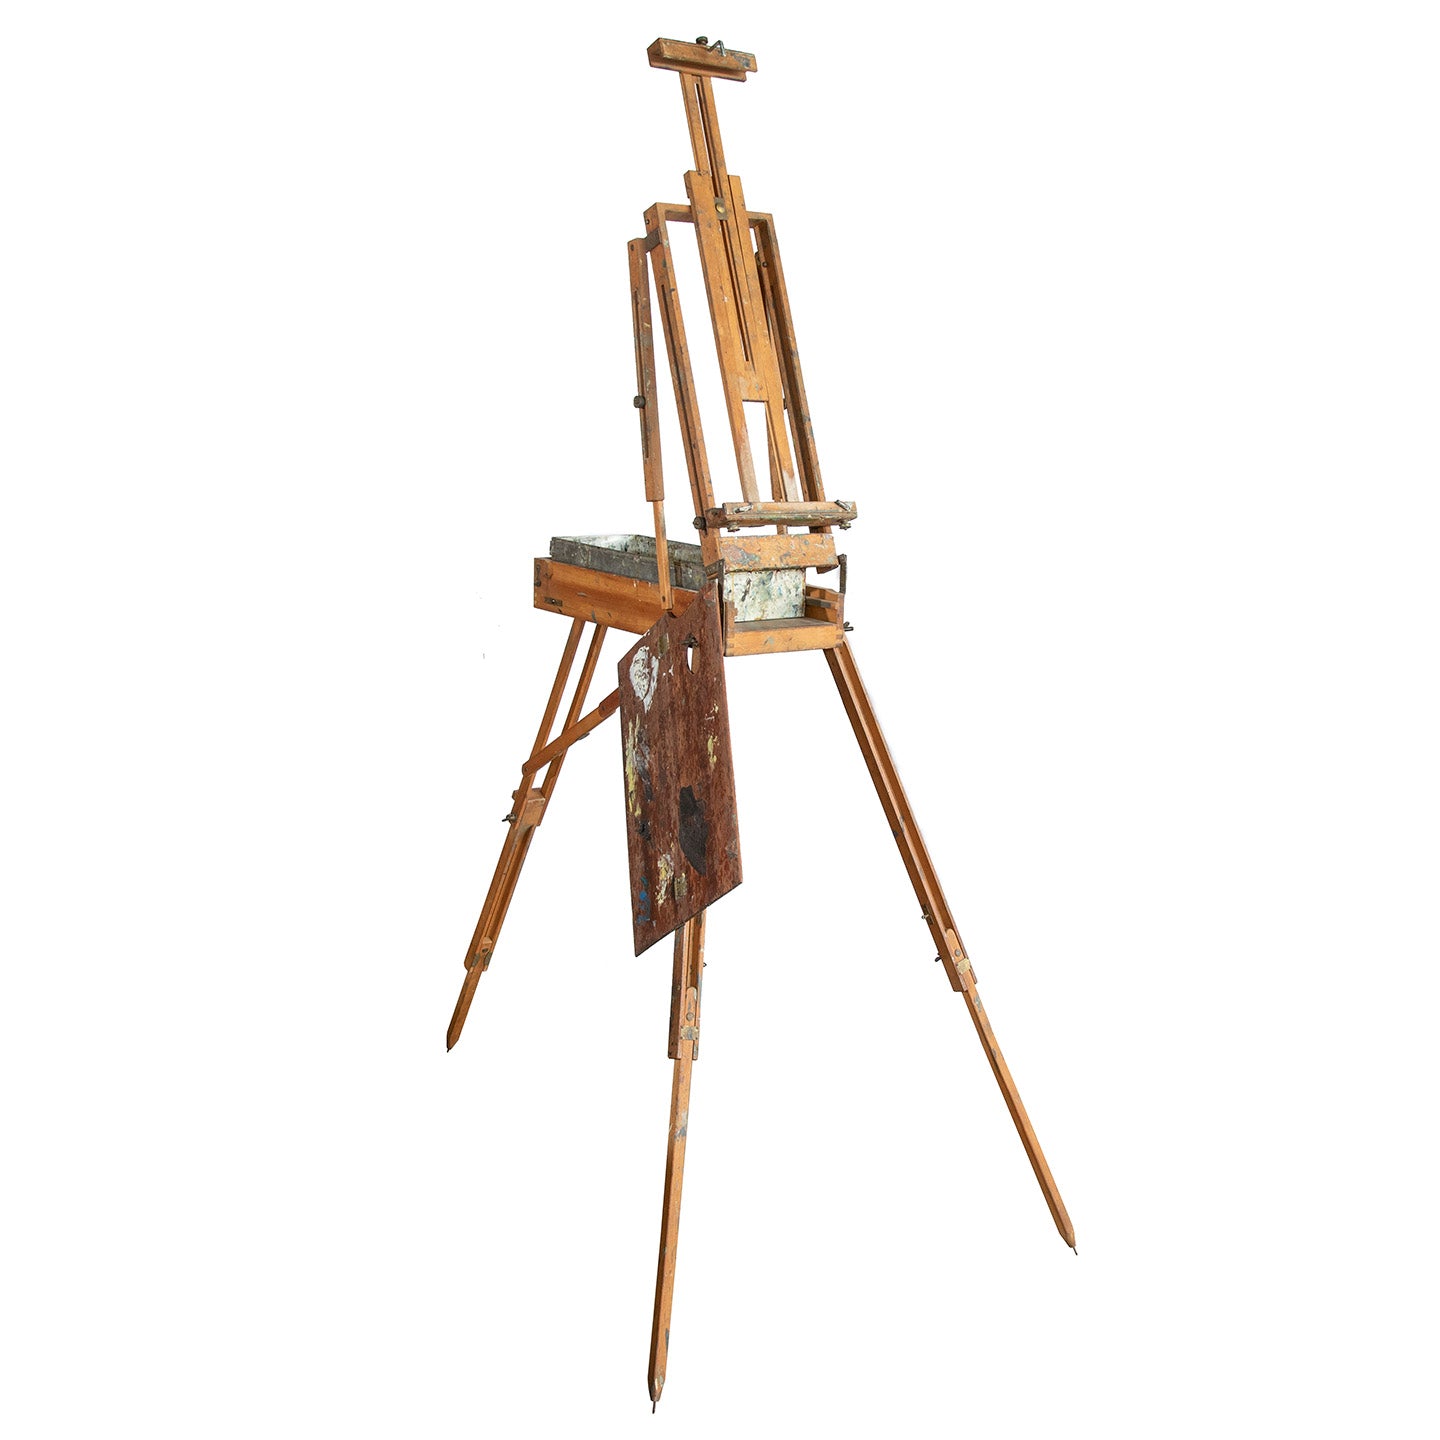 Sold at Auction: VINTAGE TRIDENT PORTABLE EASEL